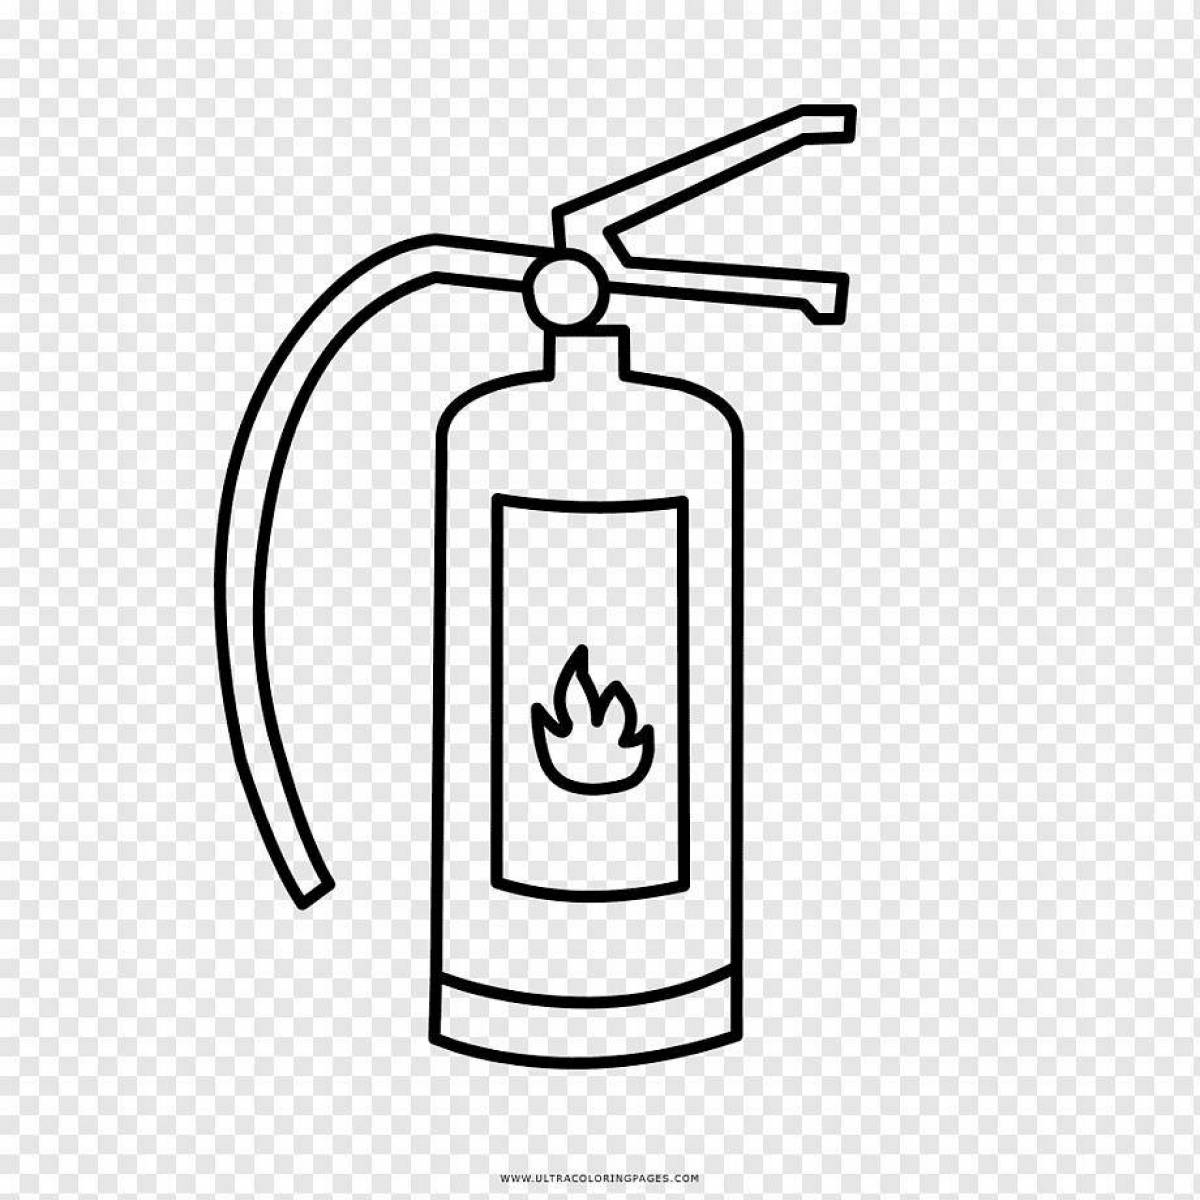 Colorful fire extinguisher coloring book for kids